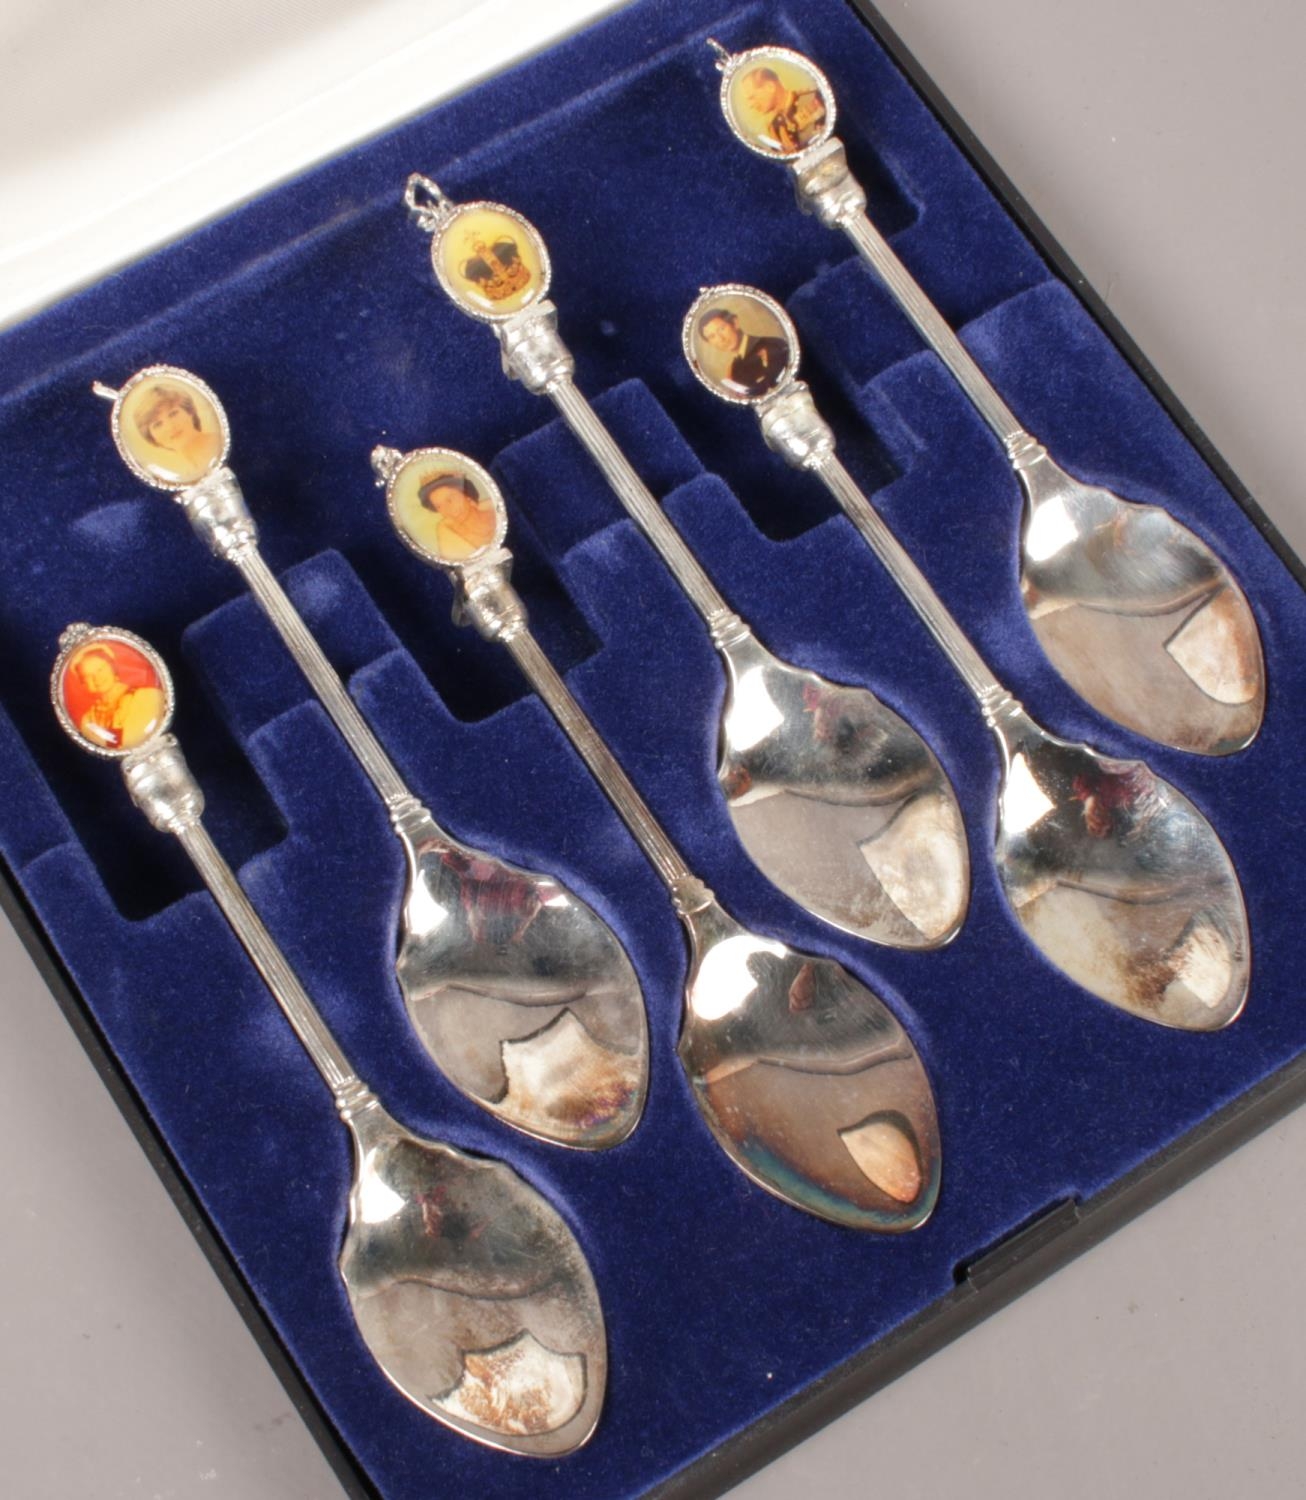 A cased set of 6 commemorative silver plate collectors spoons with portrait and mythical beast